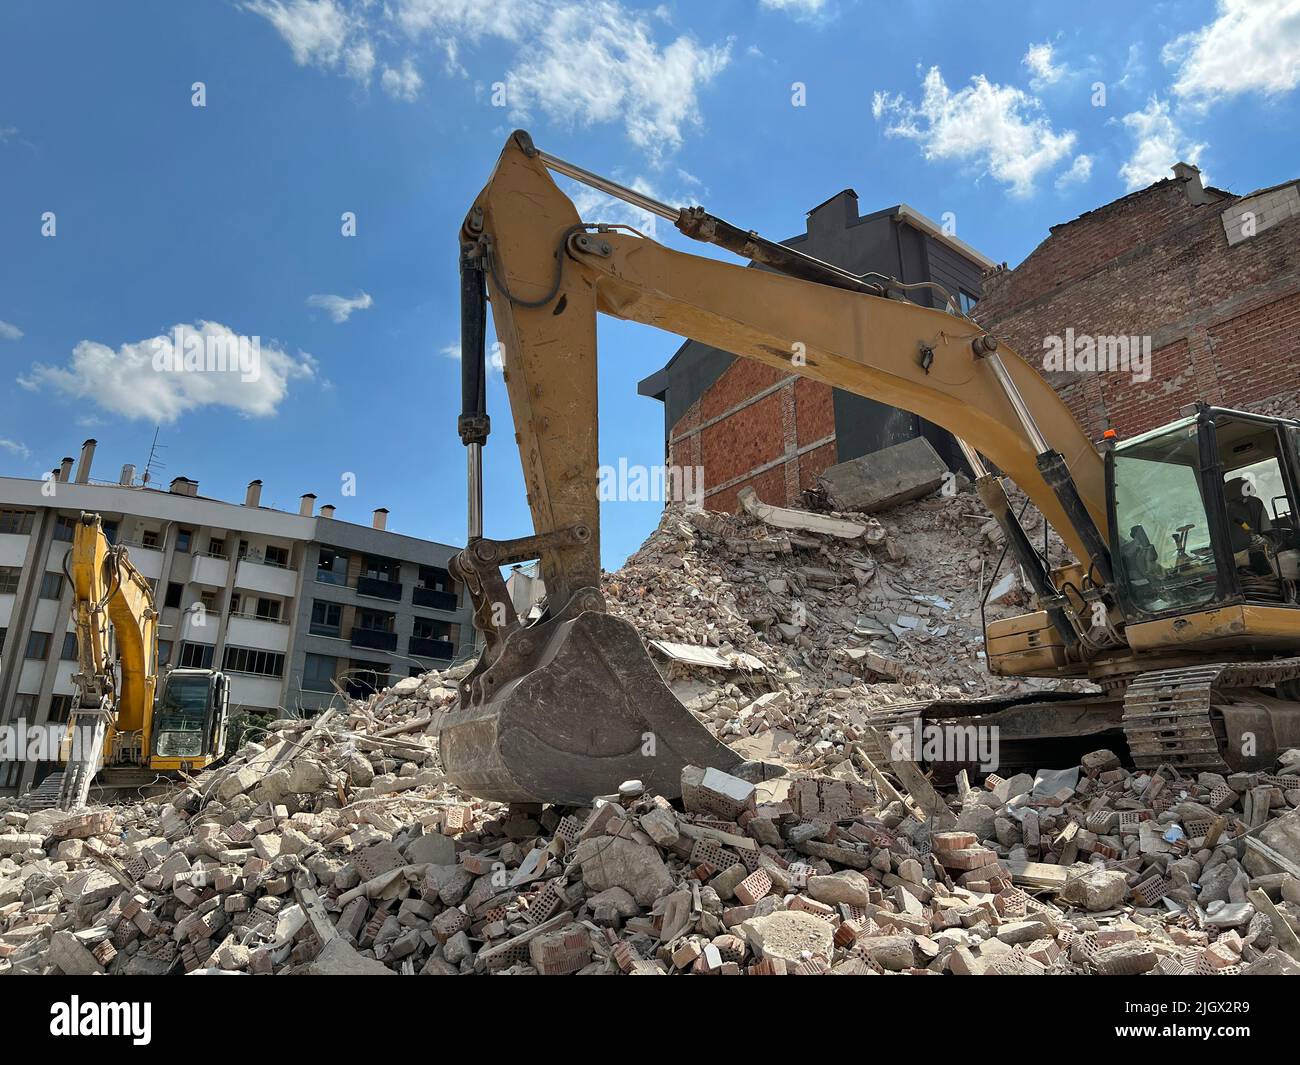 Demolition of building, two excavators are on the demolition of building. Construction site is opening for new buildings. Old buildings being demolish. Stock Photo